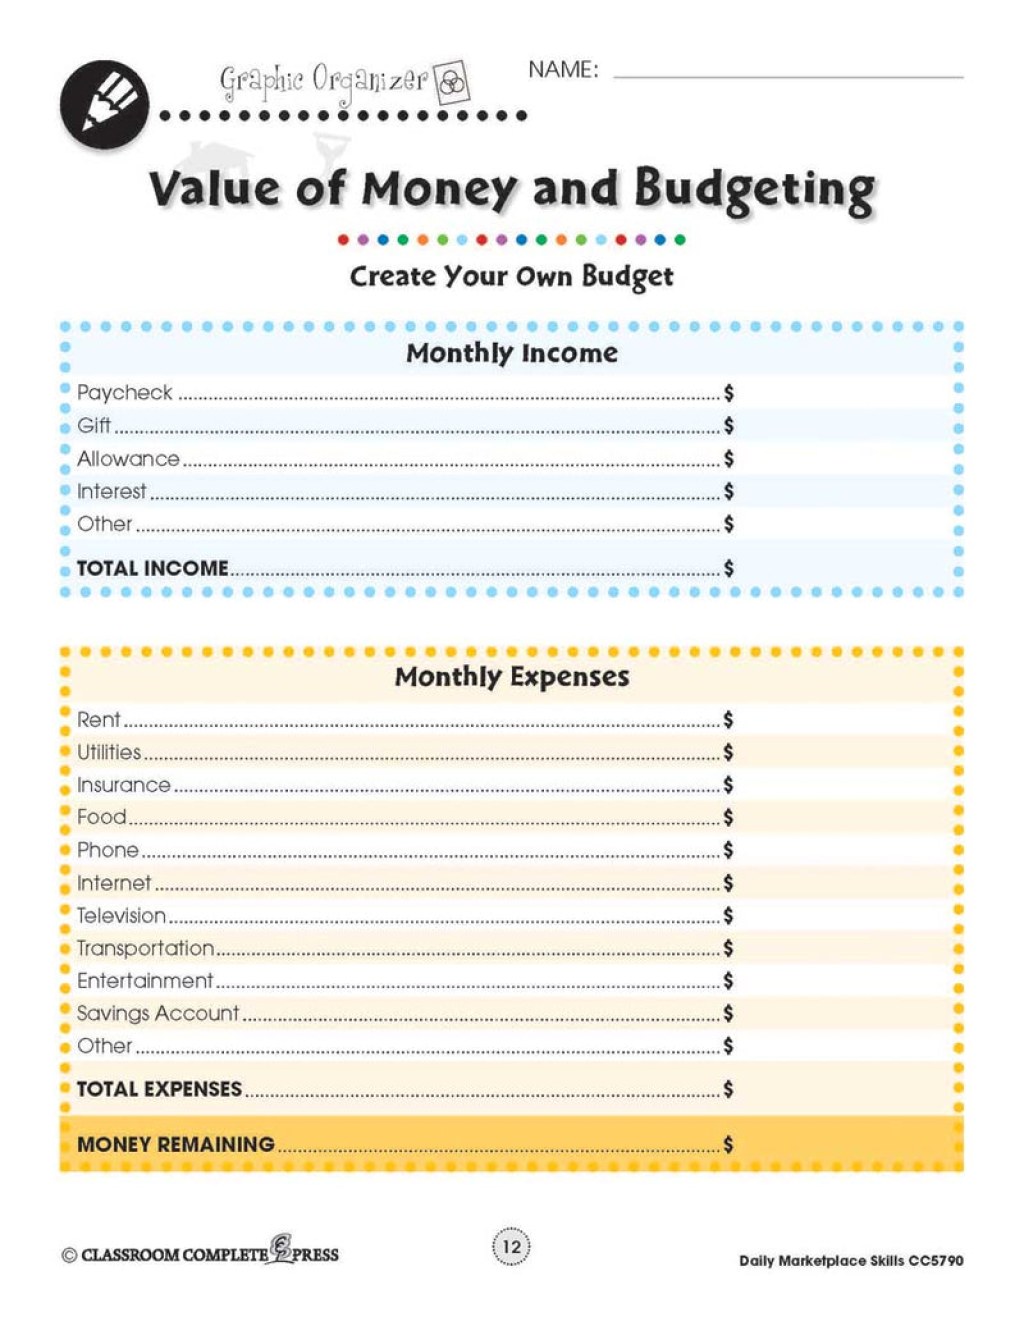 budgeting for grade 8 - Daily Marketplace Skills: Create Your Own Budget - WORKSHEET